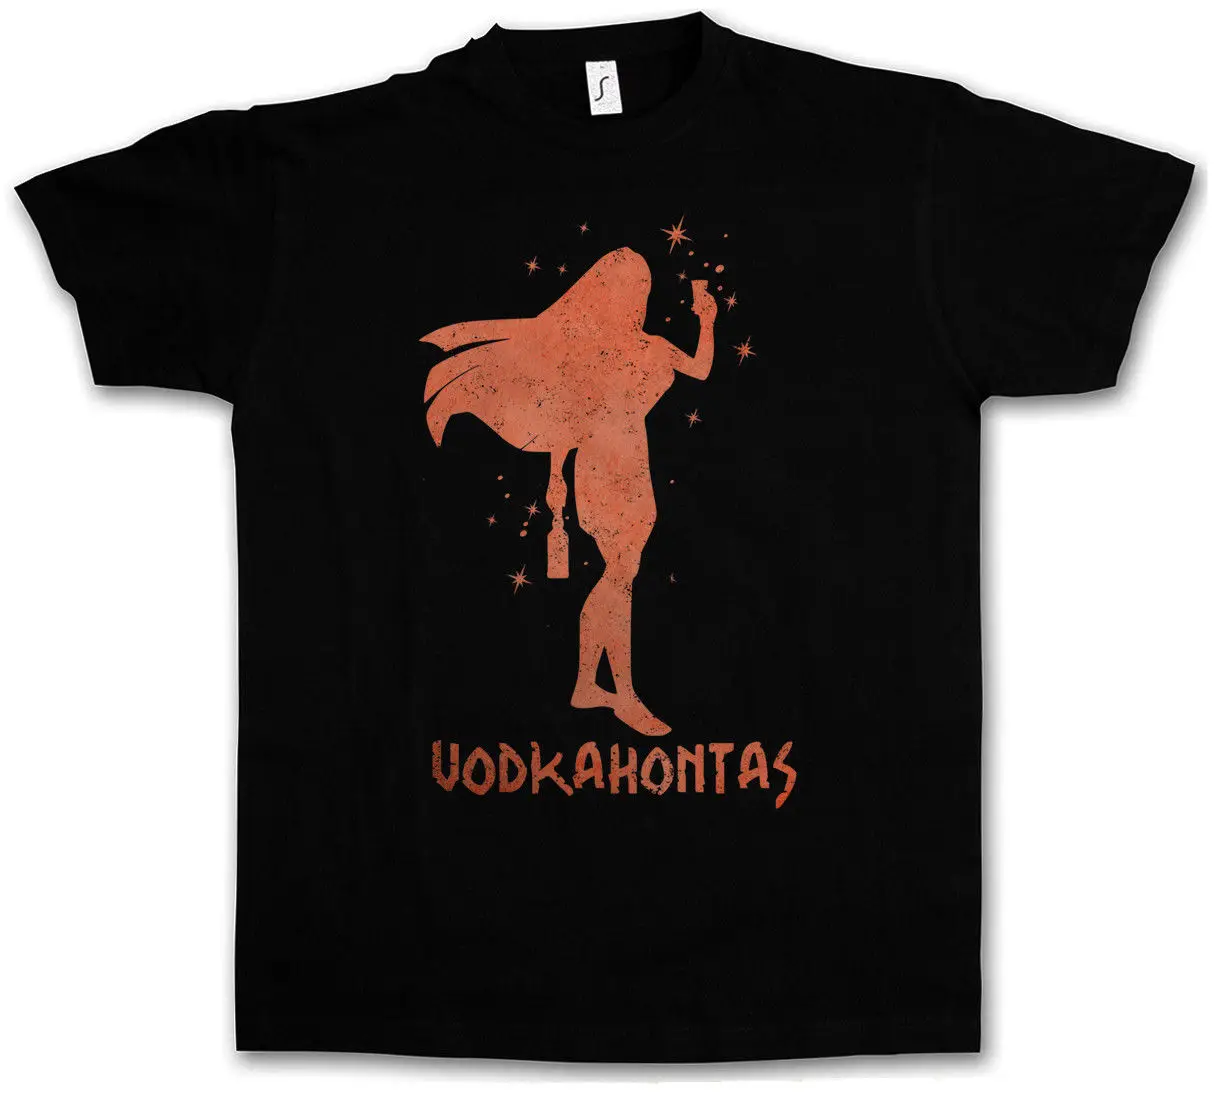 

Vodkahontas T-Shirt Fun Alcohol Drunk wasted intoxicated Party drunken Hangover Short Sleeve Hip Hop Tee T Shirt top tee